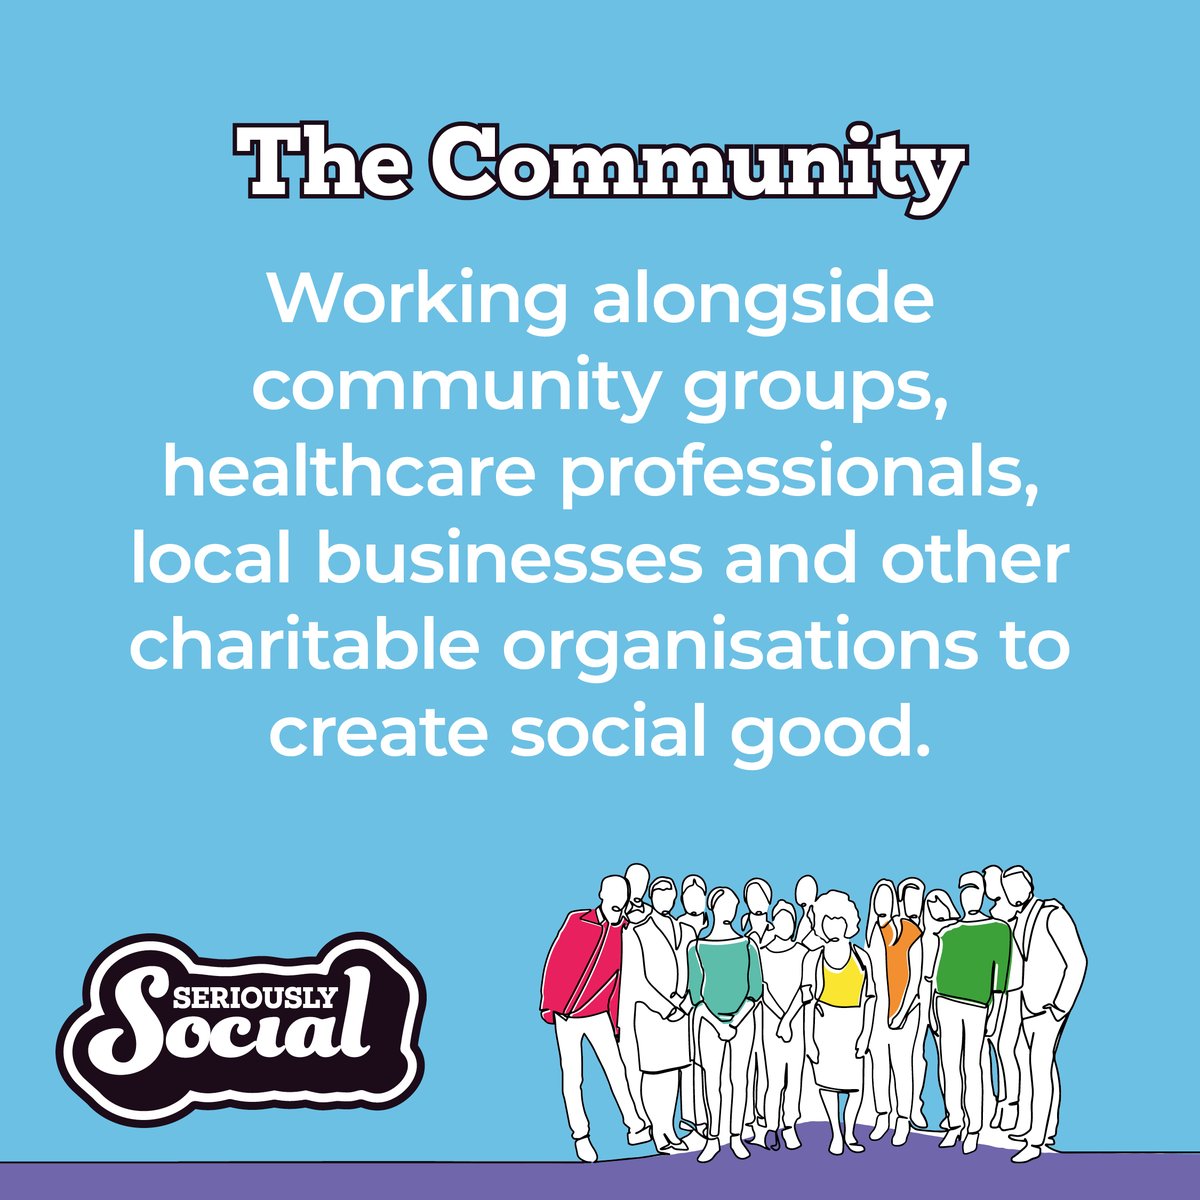 Our members are Seriously Social when it comes to supporting the community. 62% provided warm spaces in the past year & 75% provided holiday food and activity programmes. #SeriouslySocial #Community >>Seriouslysocial.org.uk